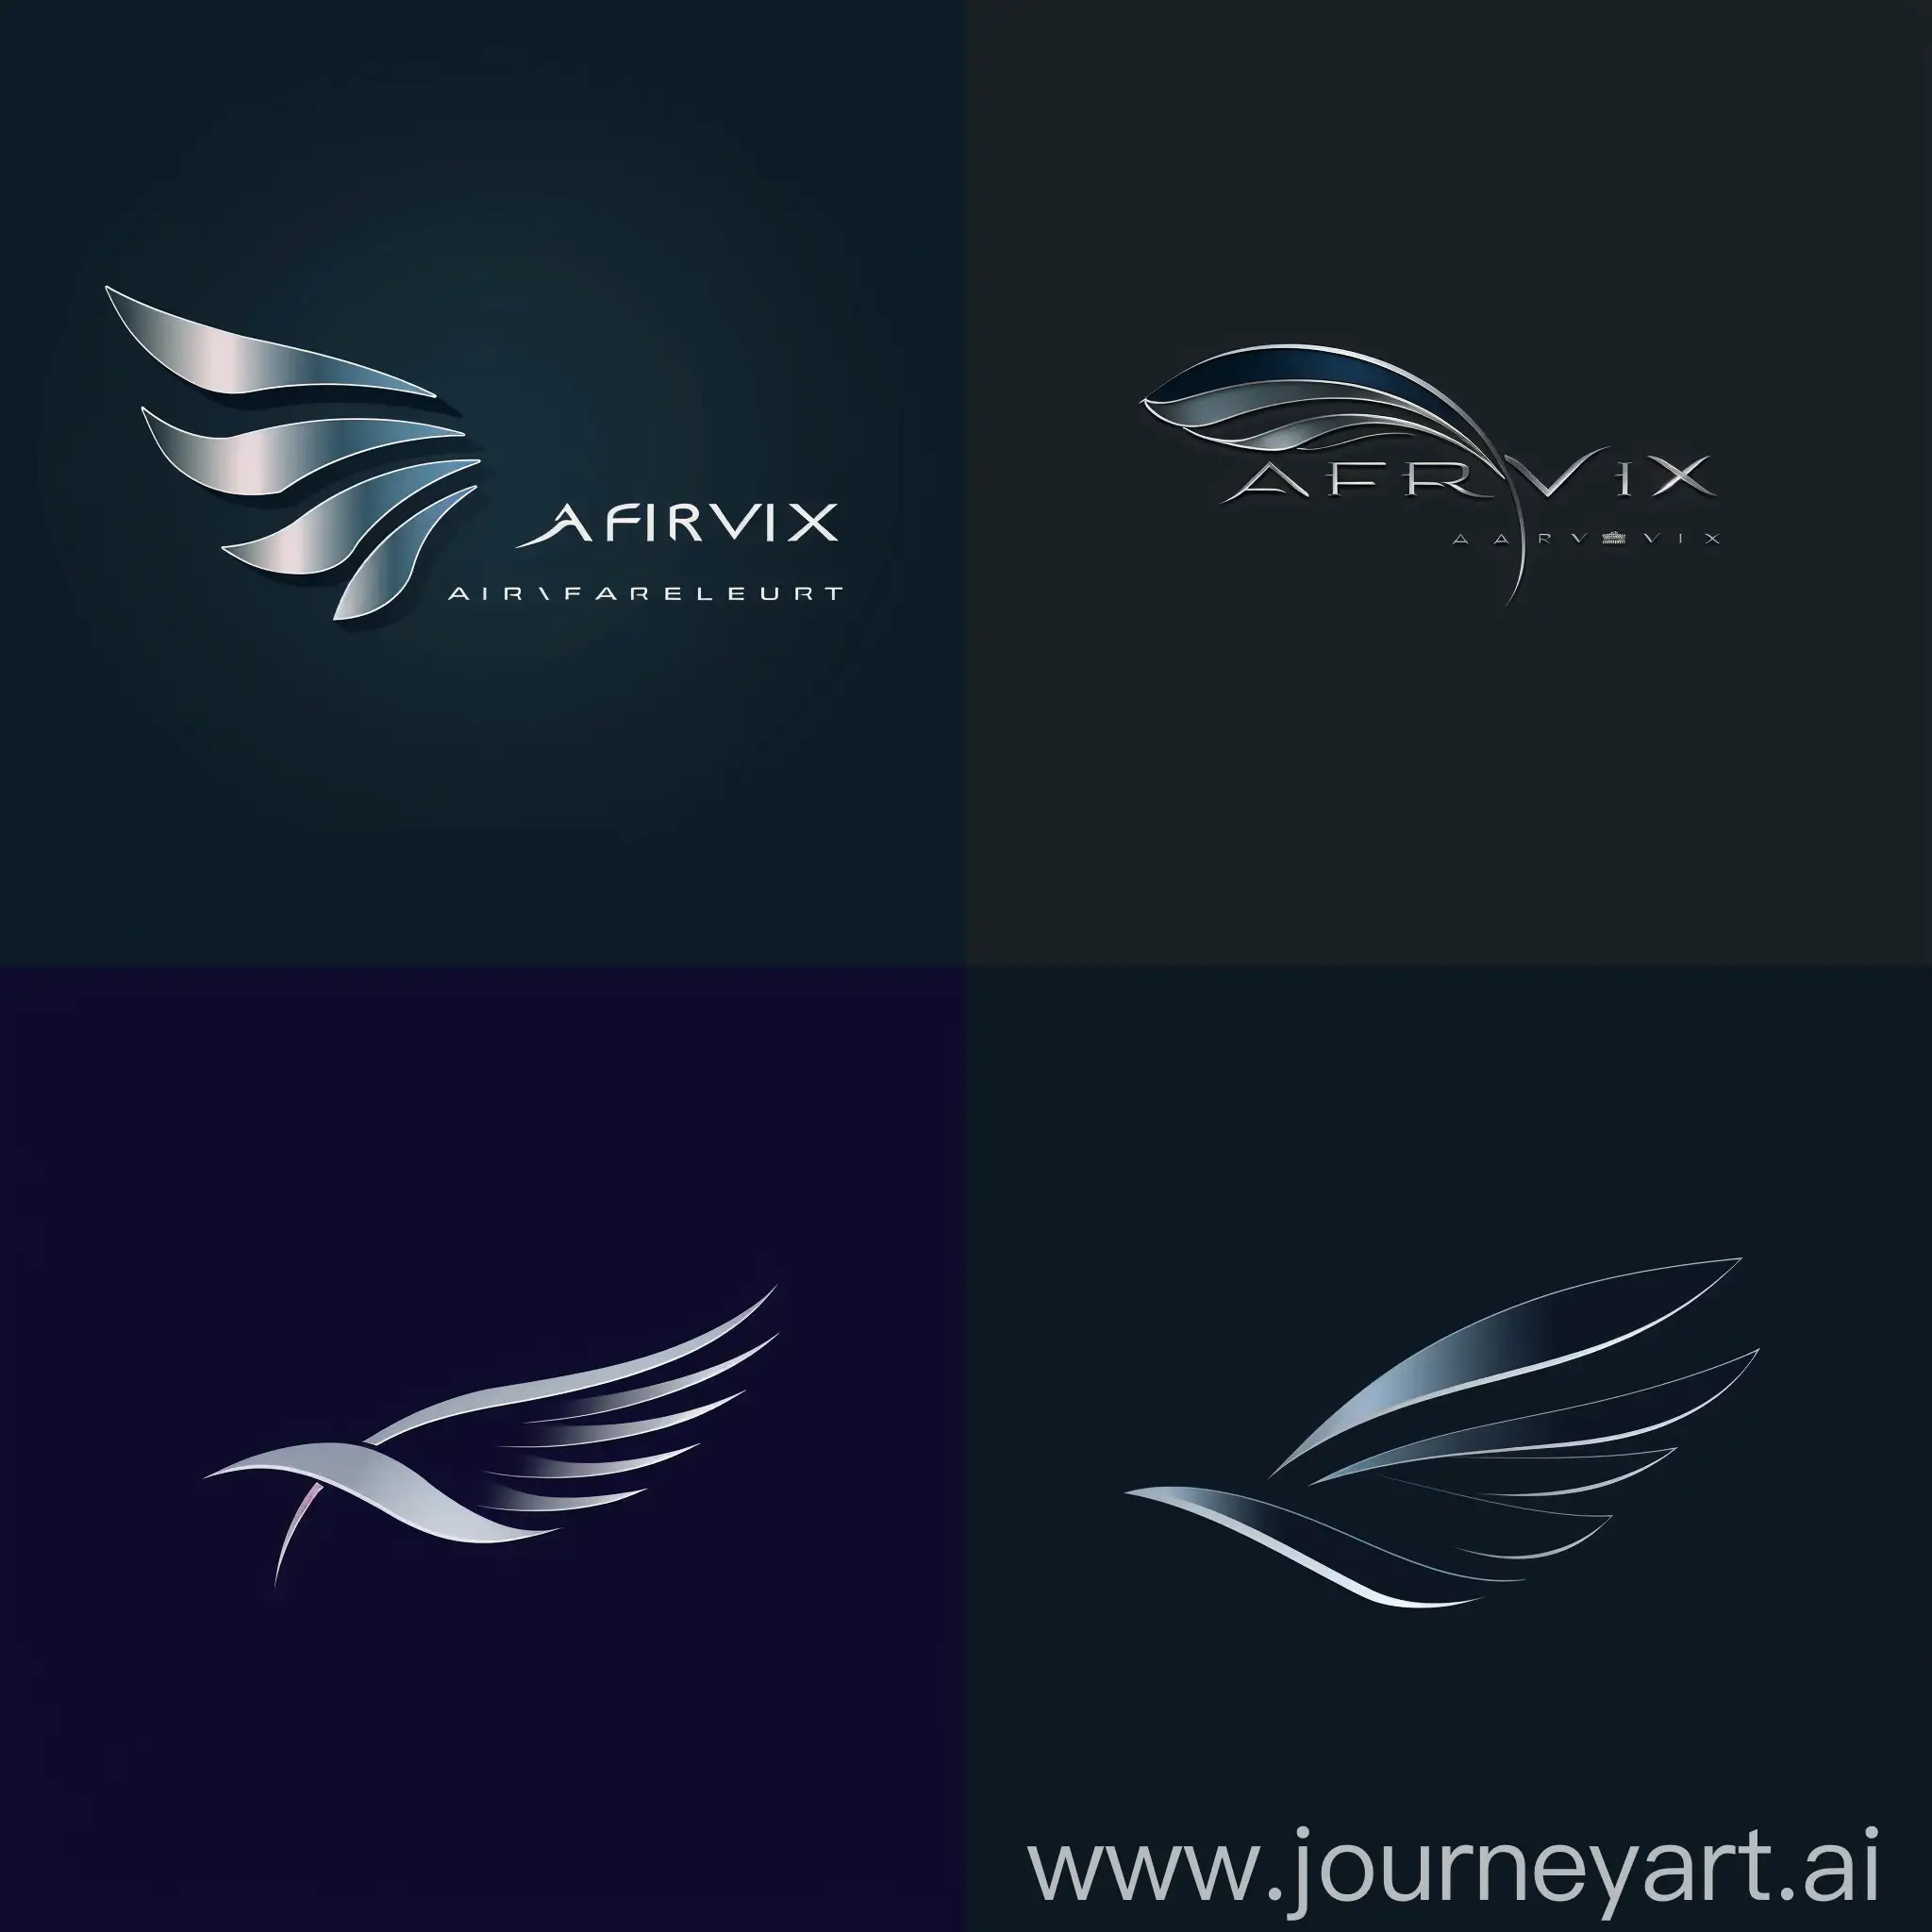 Design a sleek and dynamic logo for AeroVix, an airline that embodies elegance, innovation, and speed. Incorporate a unique symbol representing flight, such as a stylized wing or soaring bird. Choose a clean, modern font for the company name, conveying professionalism and trustworthiness. Use a color palette of dark blue for trust and stability, along with silver accents for sophistication. Keep the design minimalist, visually balanced, and versatile across different mediums. Ensure the logo reflects AeroVix's brand identity and resonates with the target audience. Seek professional feedback to capture AeroVix's essence in the aviation industry.